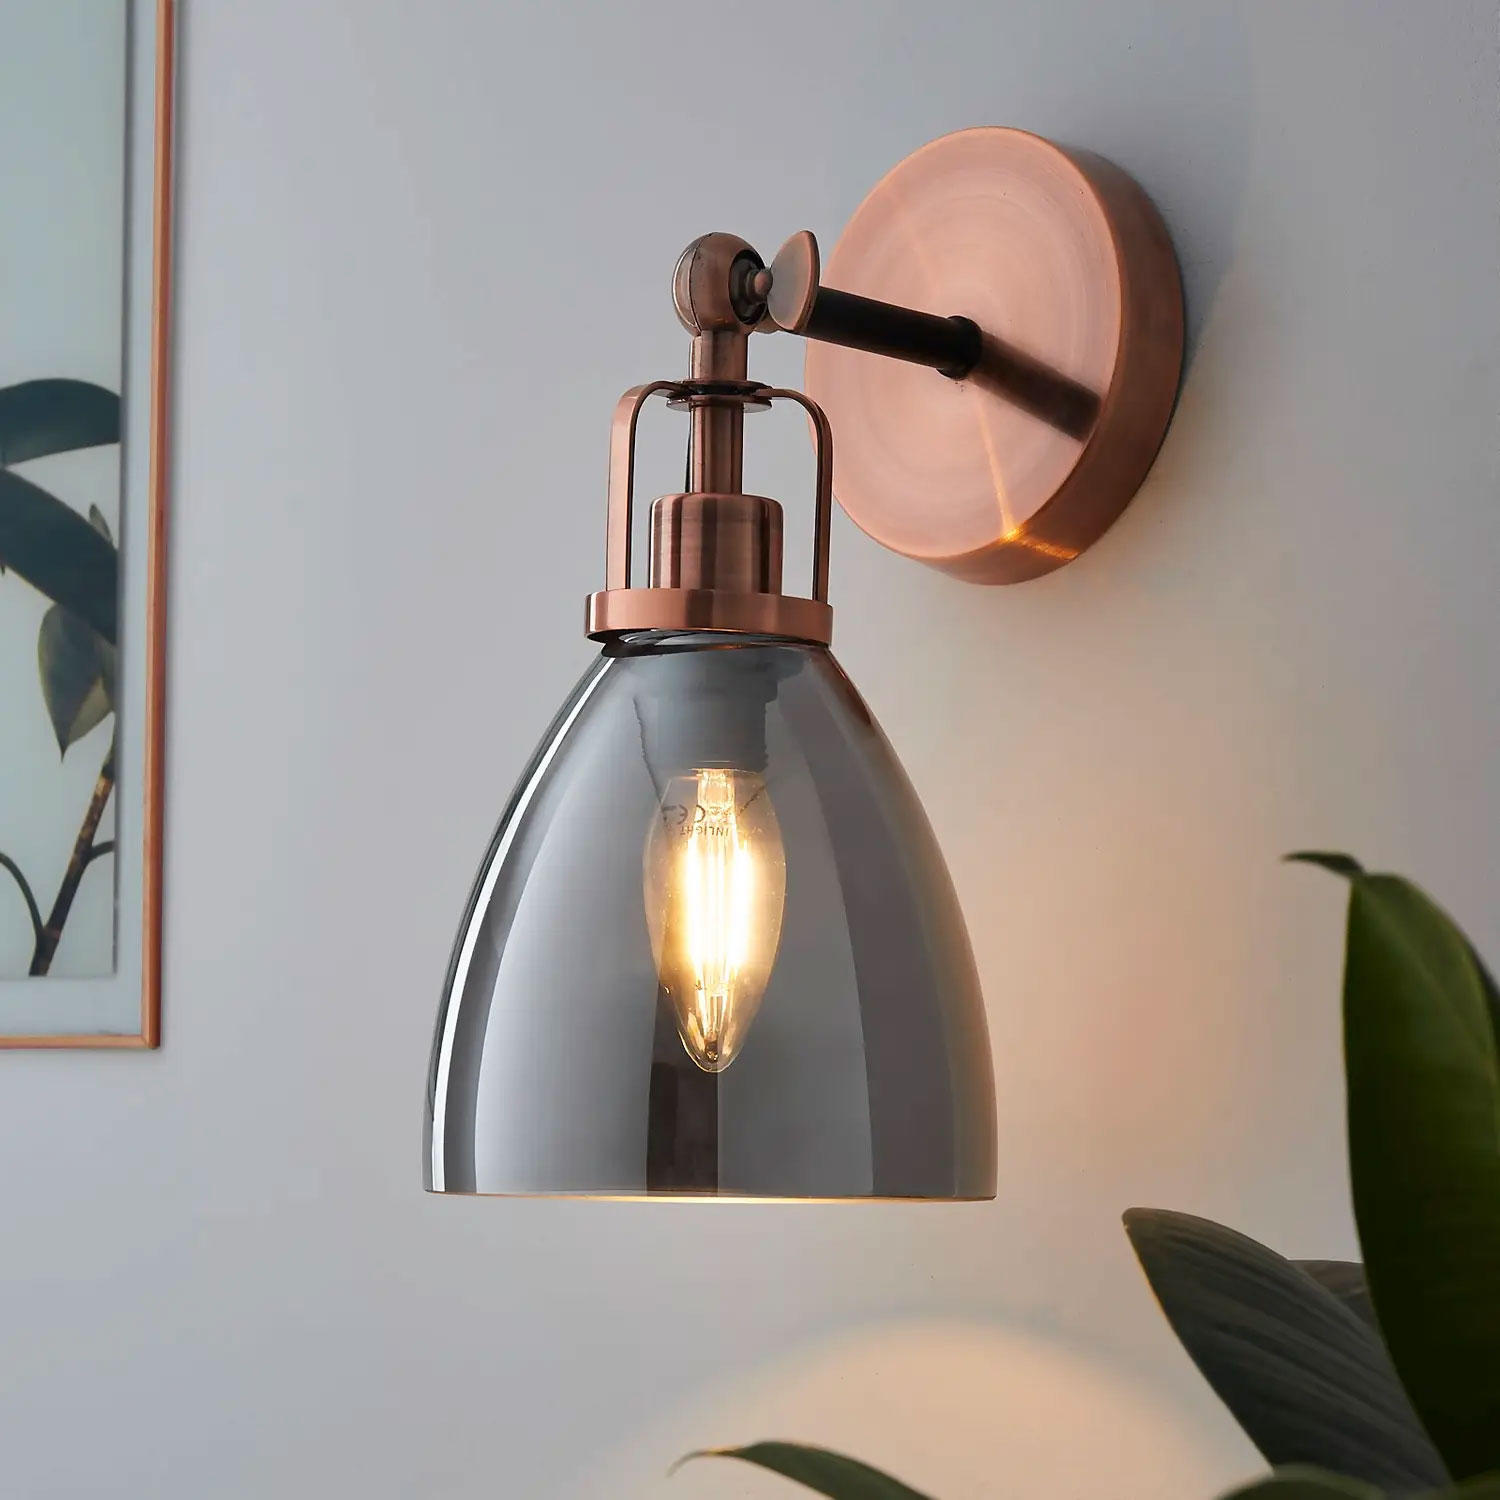 A rose gold and grey glass wall light